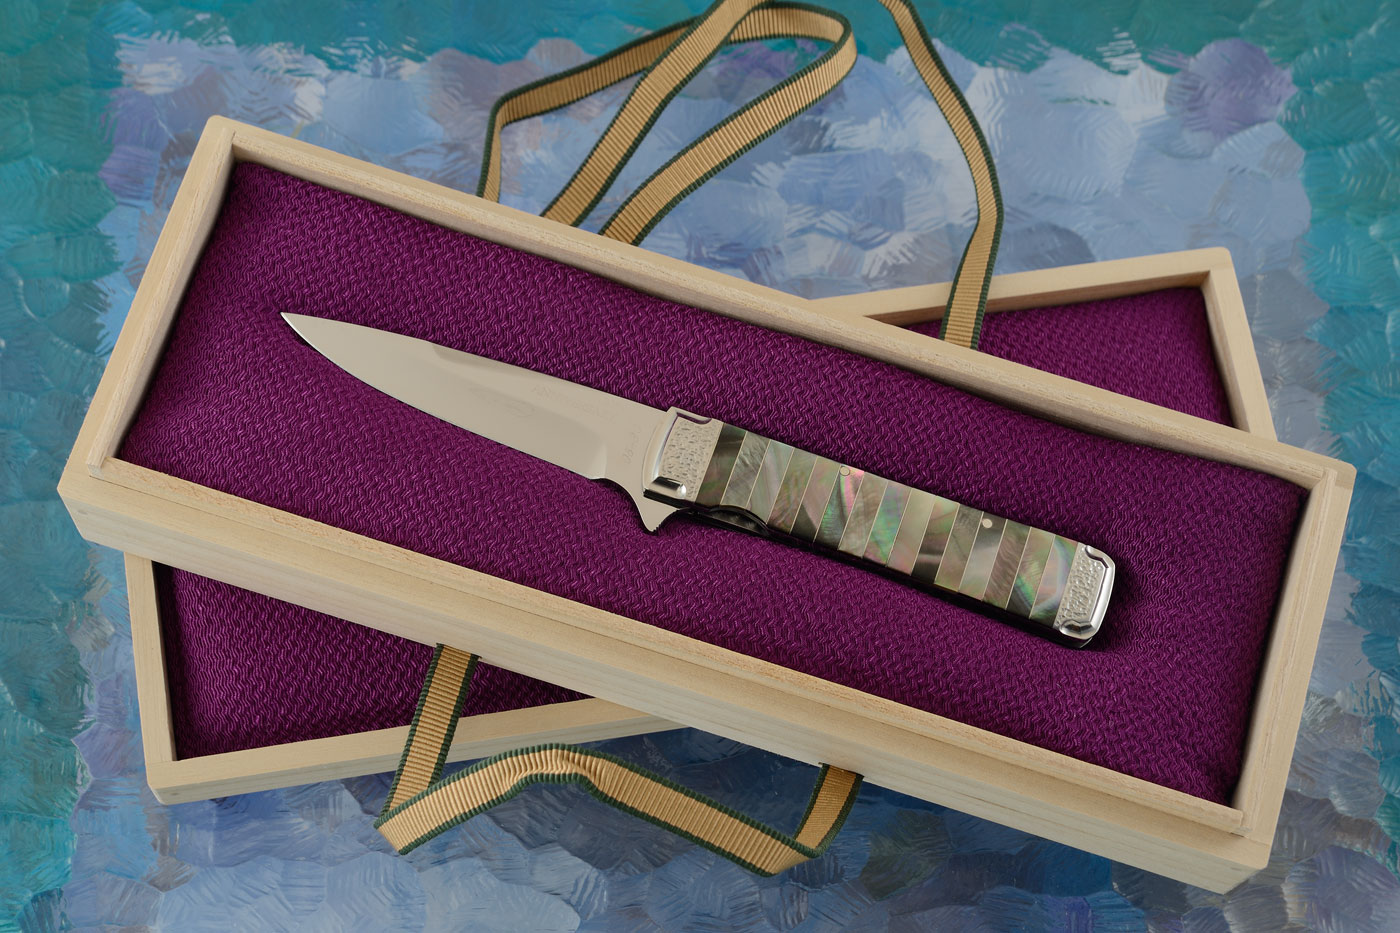 30th Anniversary Flipper with Blacklip Mother of Pearl - #5 of 30 (Limited Edition)